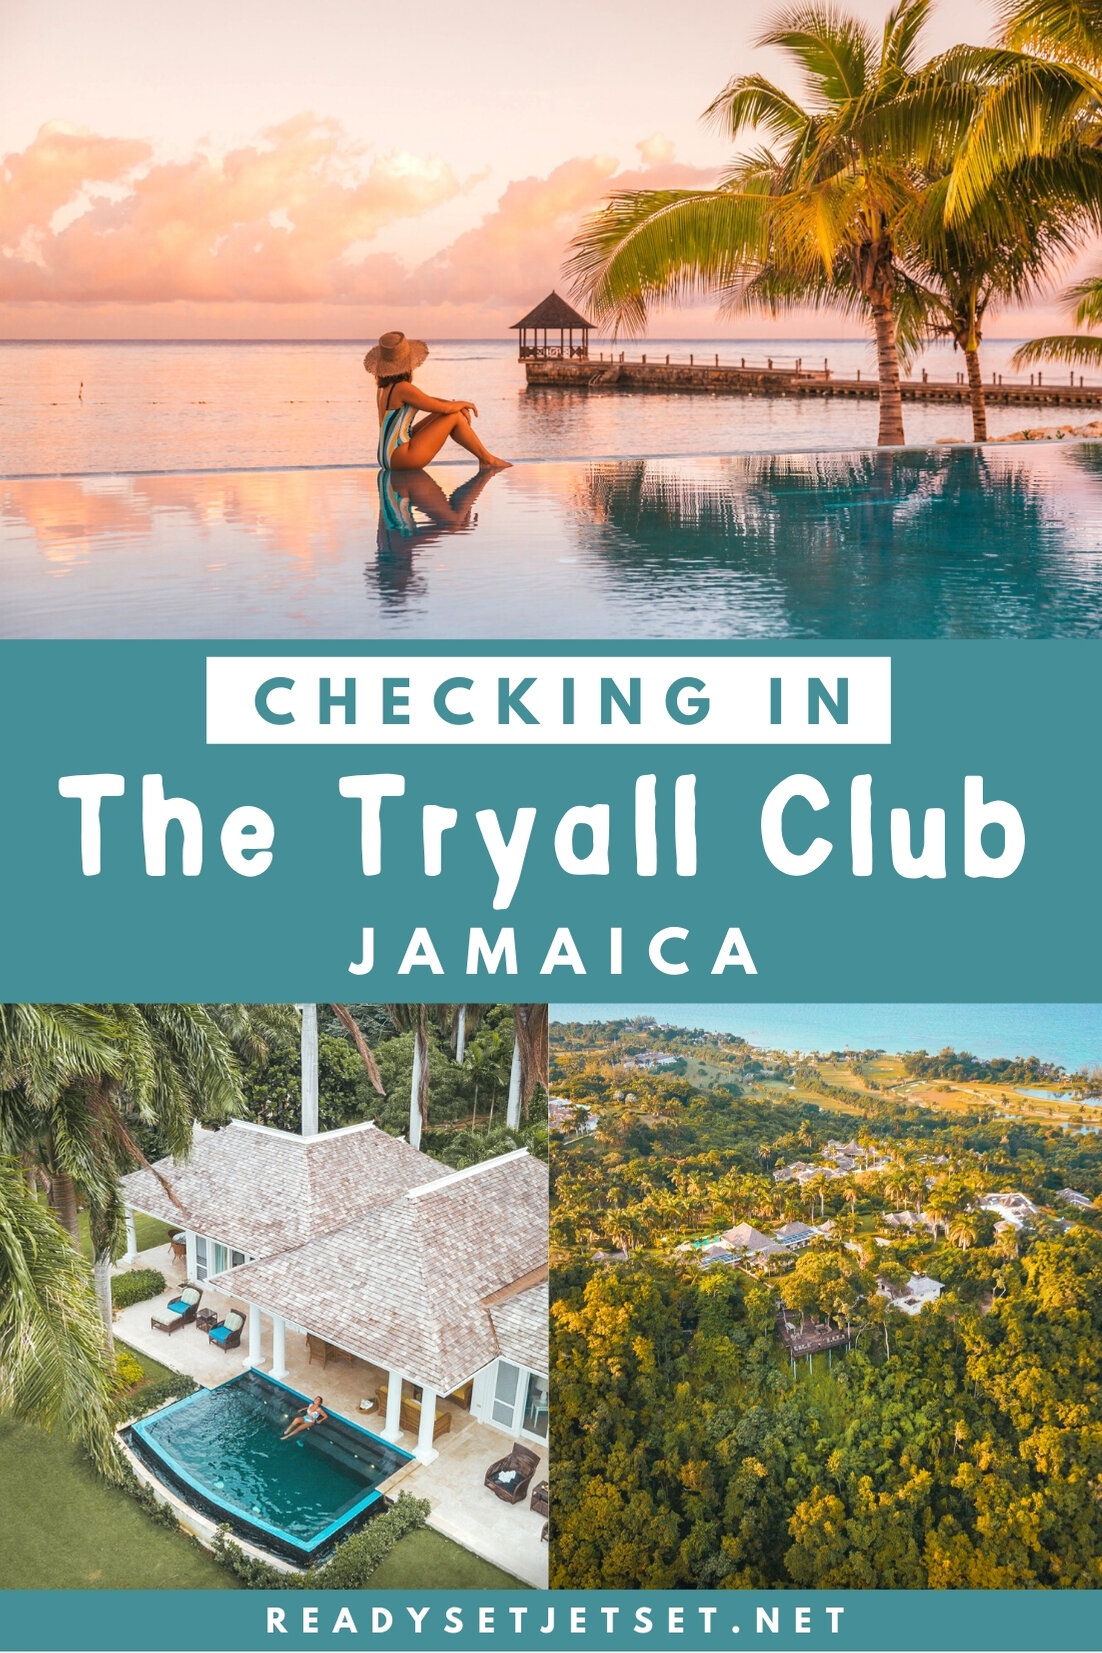 Checking In: The Following Seas Villa at The Tryall Club in Jamaica